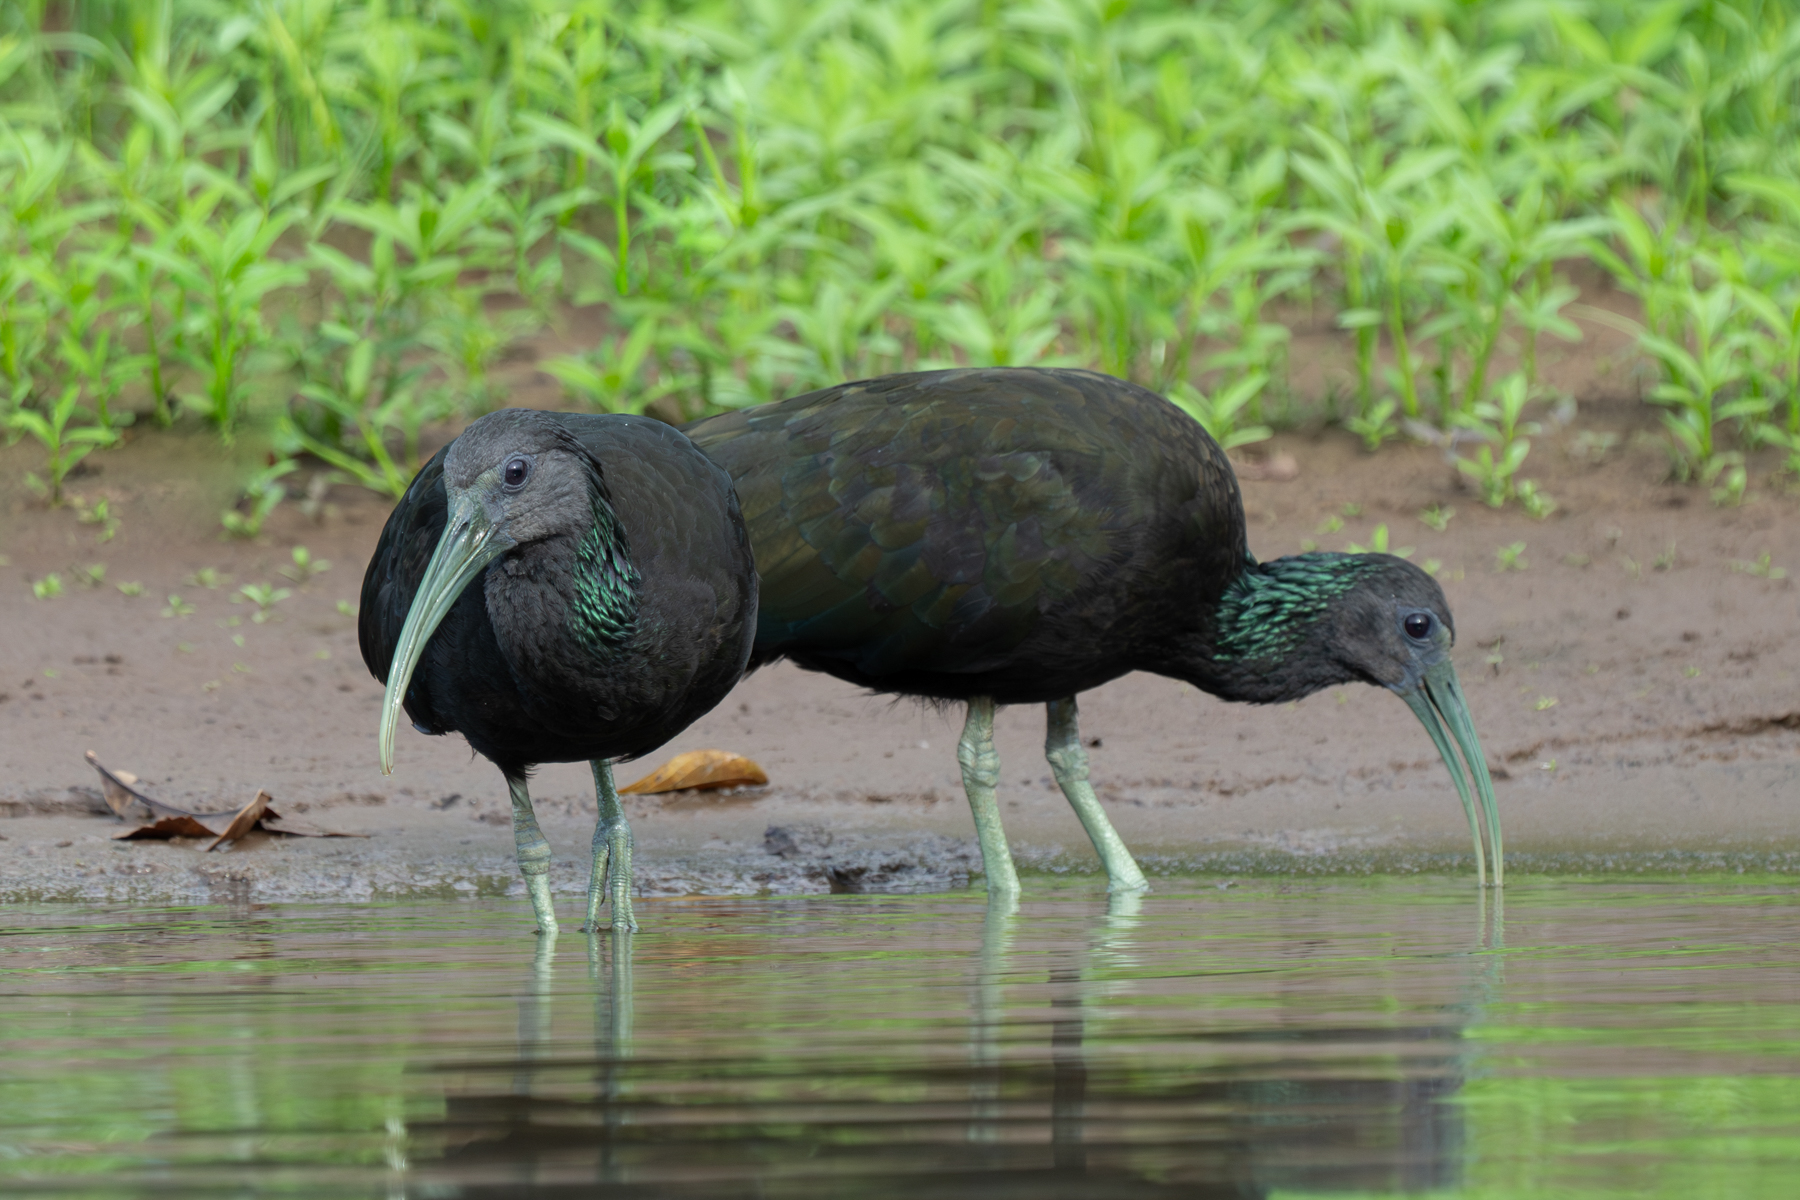 A pair of Green Ibises on the shore of the Rio Frio (image by Inger Vandyke)